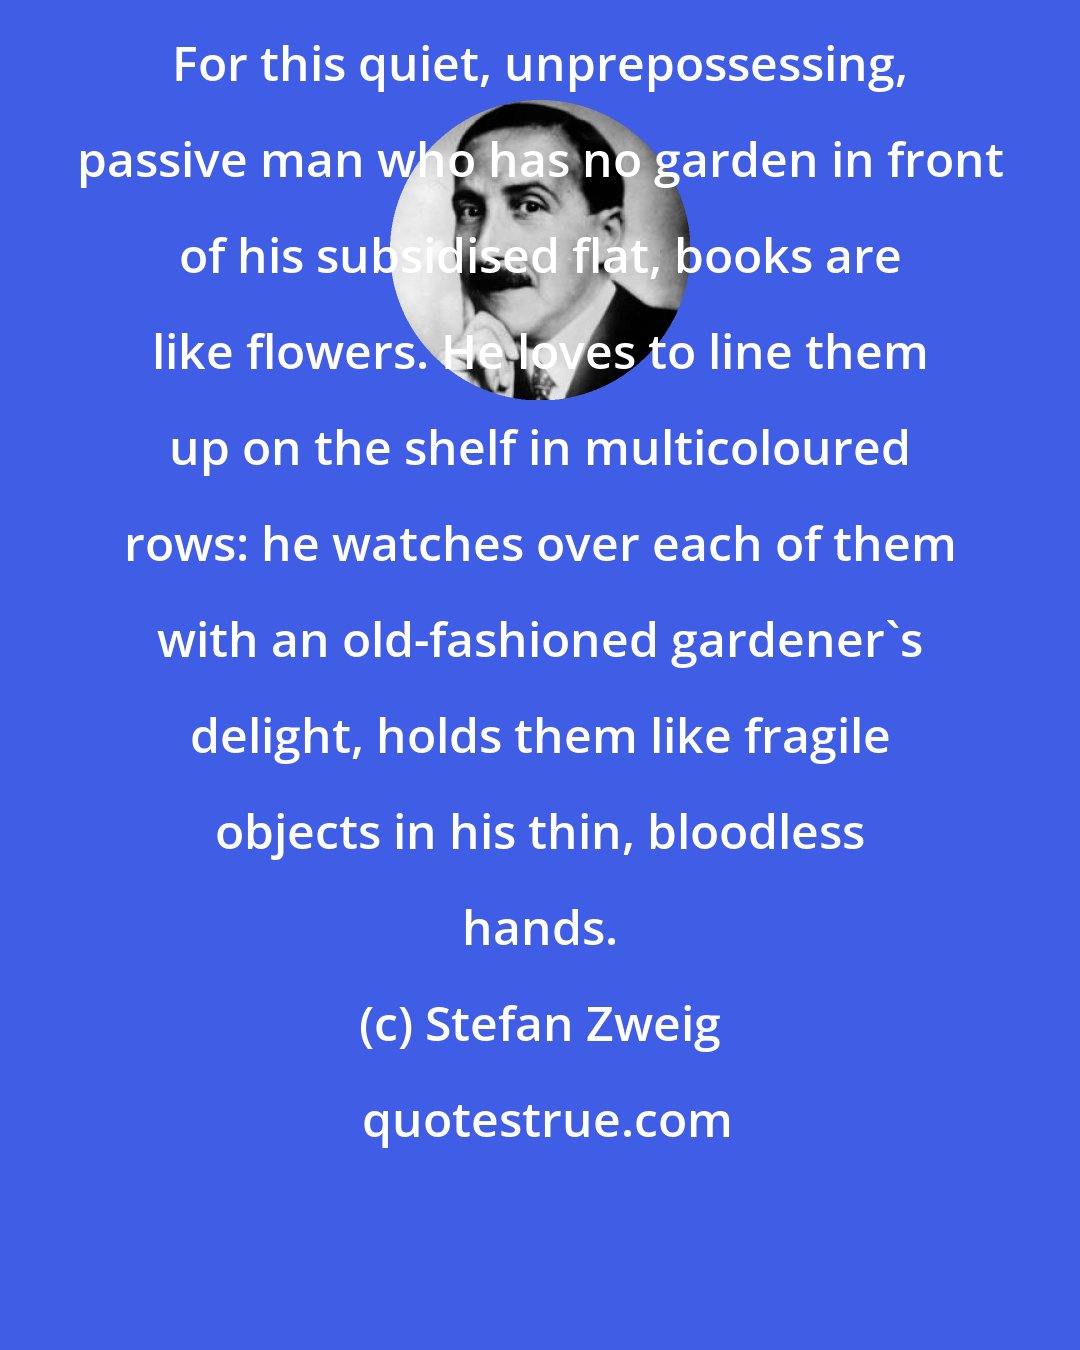 Stefan Zweig: For this quiet, unprepossessing, passive man who has no garden in front of his subsidised flat, books are like flowers. He loves to line them up on the shelf in multicoloured rows: he watches over each of them with an old-fashioned gardener's delight, holds them like fragile objects in his thin, bloodless hands.